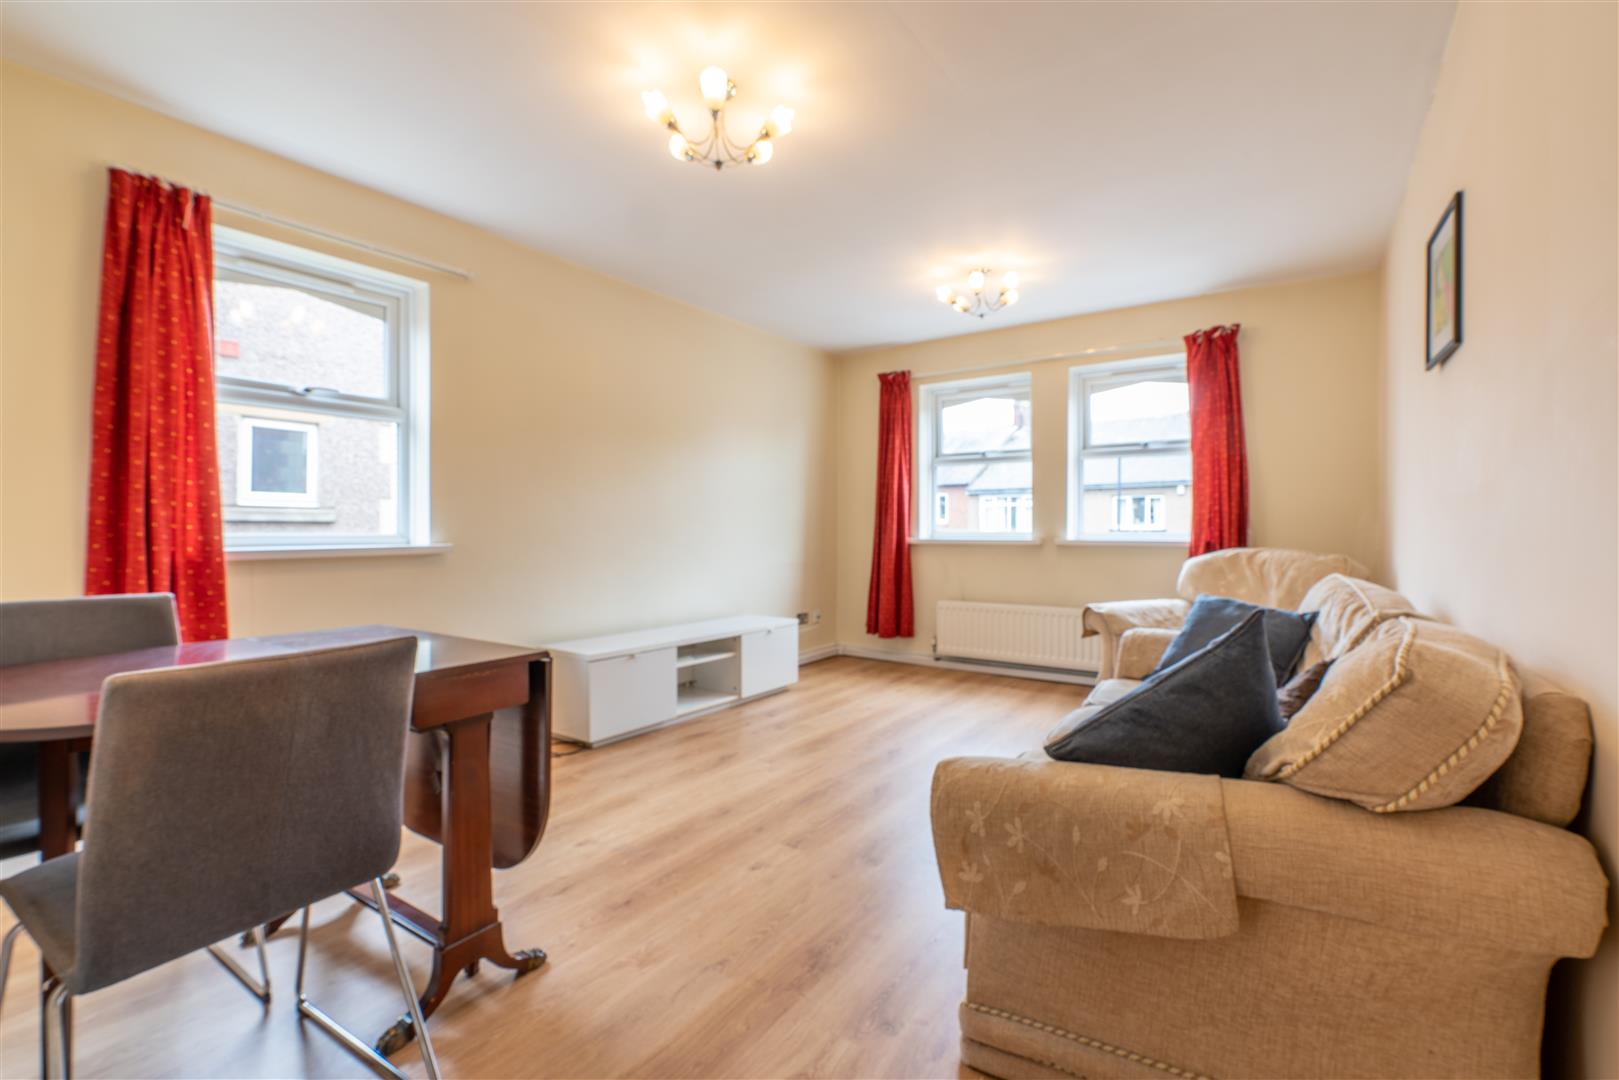 2 bed flat to rent in Regent Road, Gosforth - Property Image 1